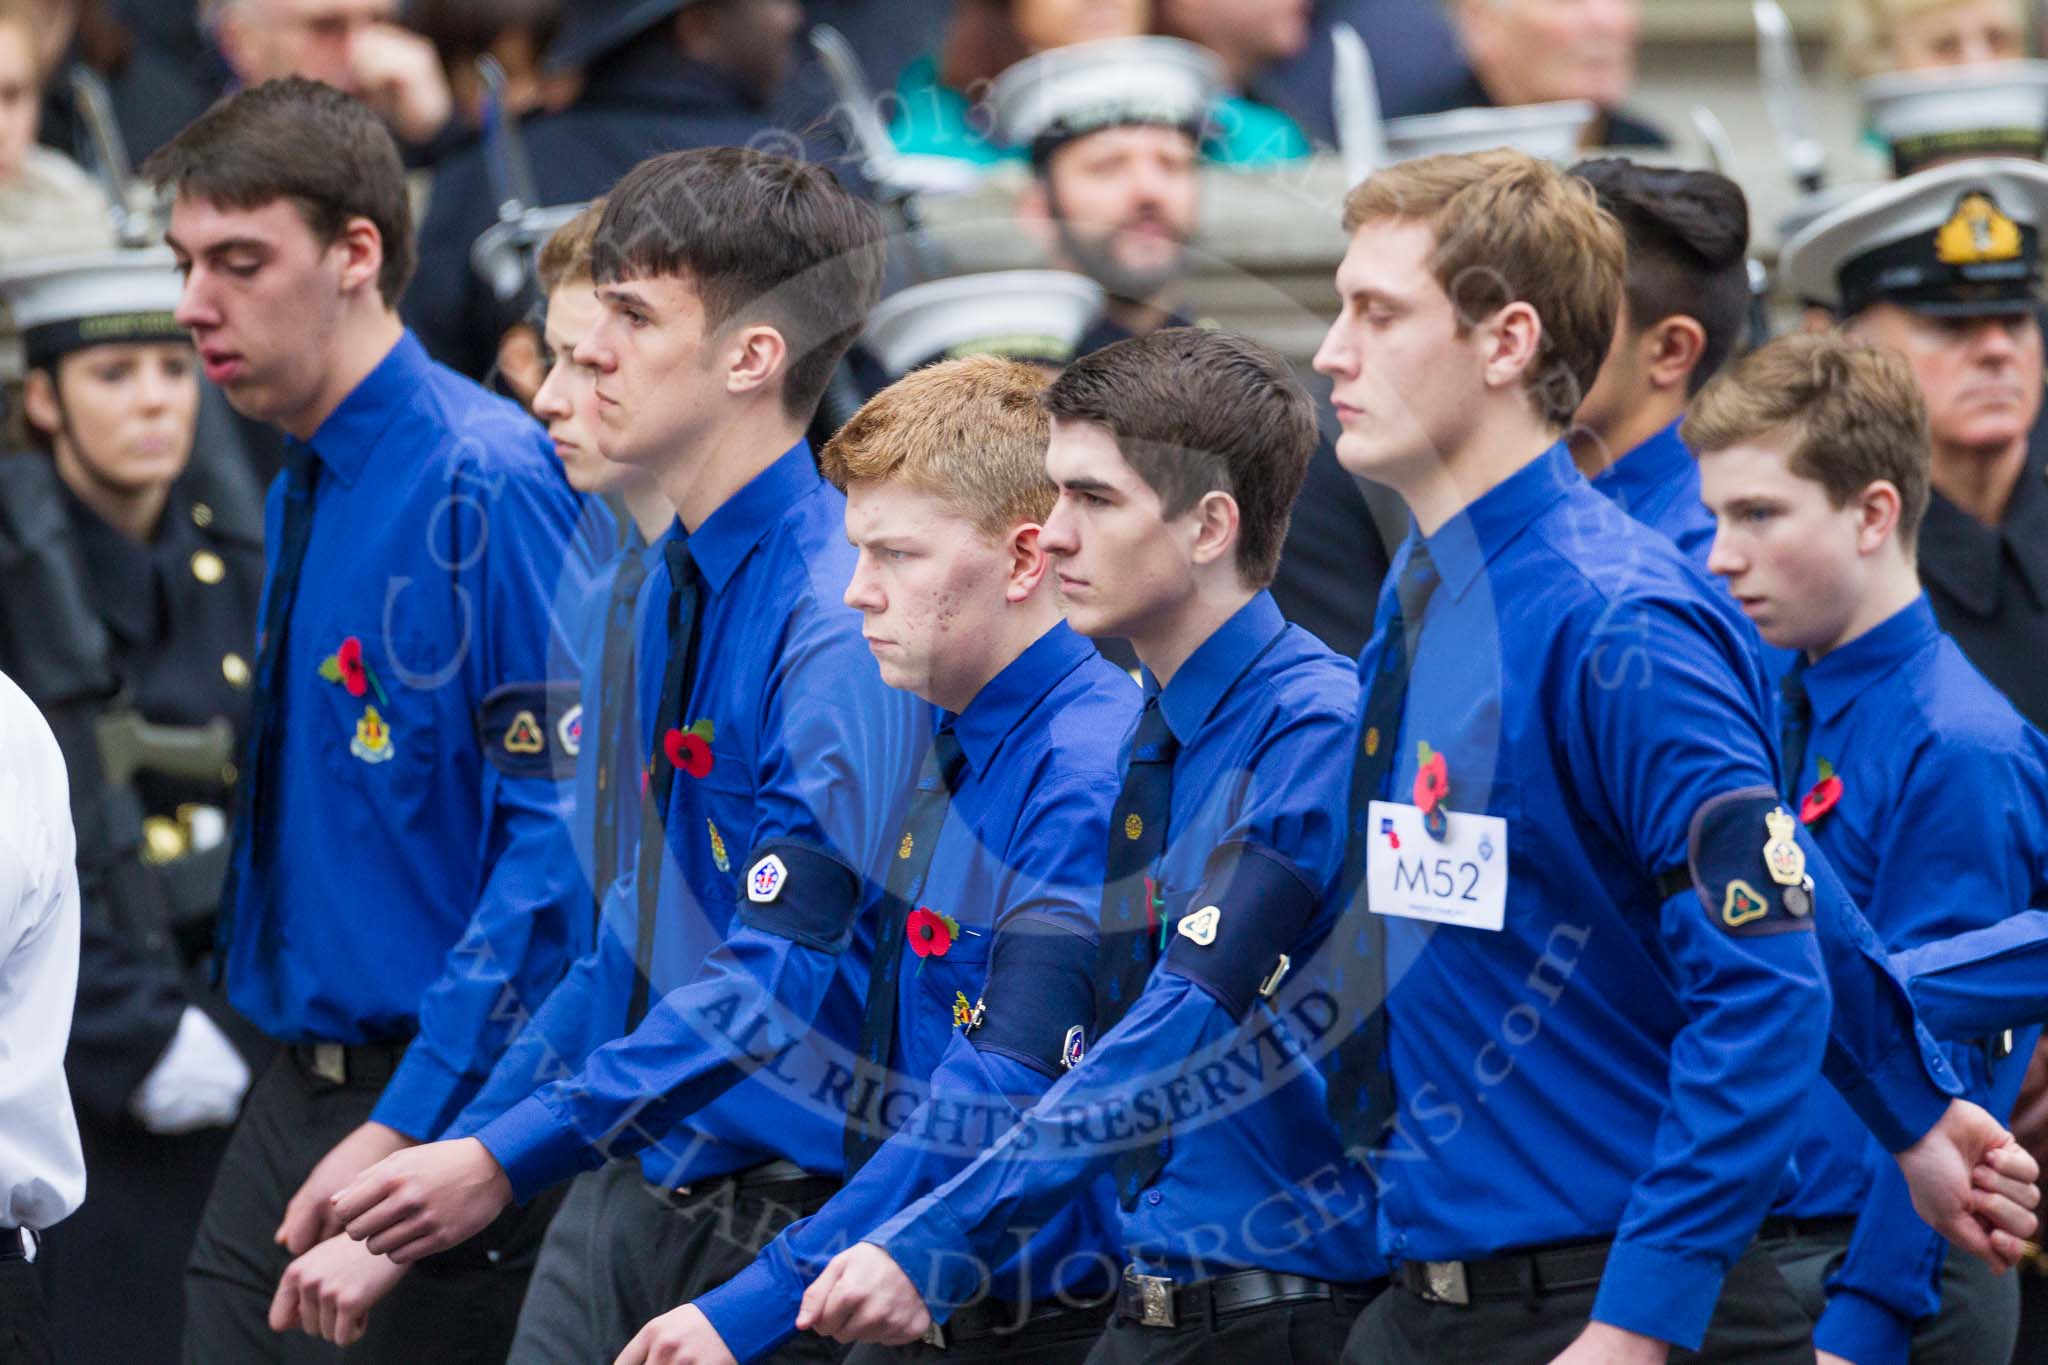 Remembrance Sunday at the Cenotaph 2015: Group M52, Boys Brigade.
Cenotaph, Whitehall, London SW1,
London,
Greater London,
United Kingdom,
on 08 November 2015 at 12:21, image #1736